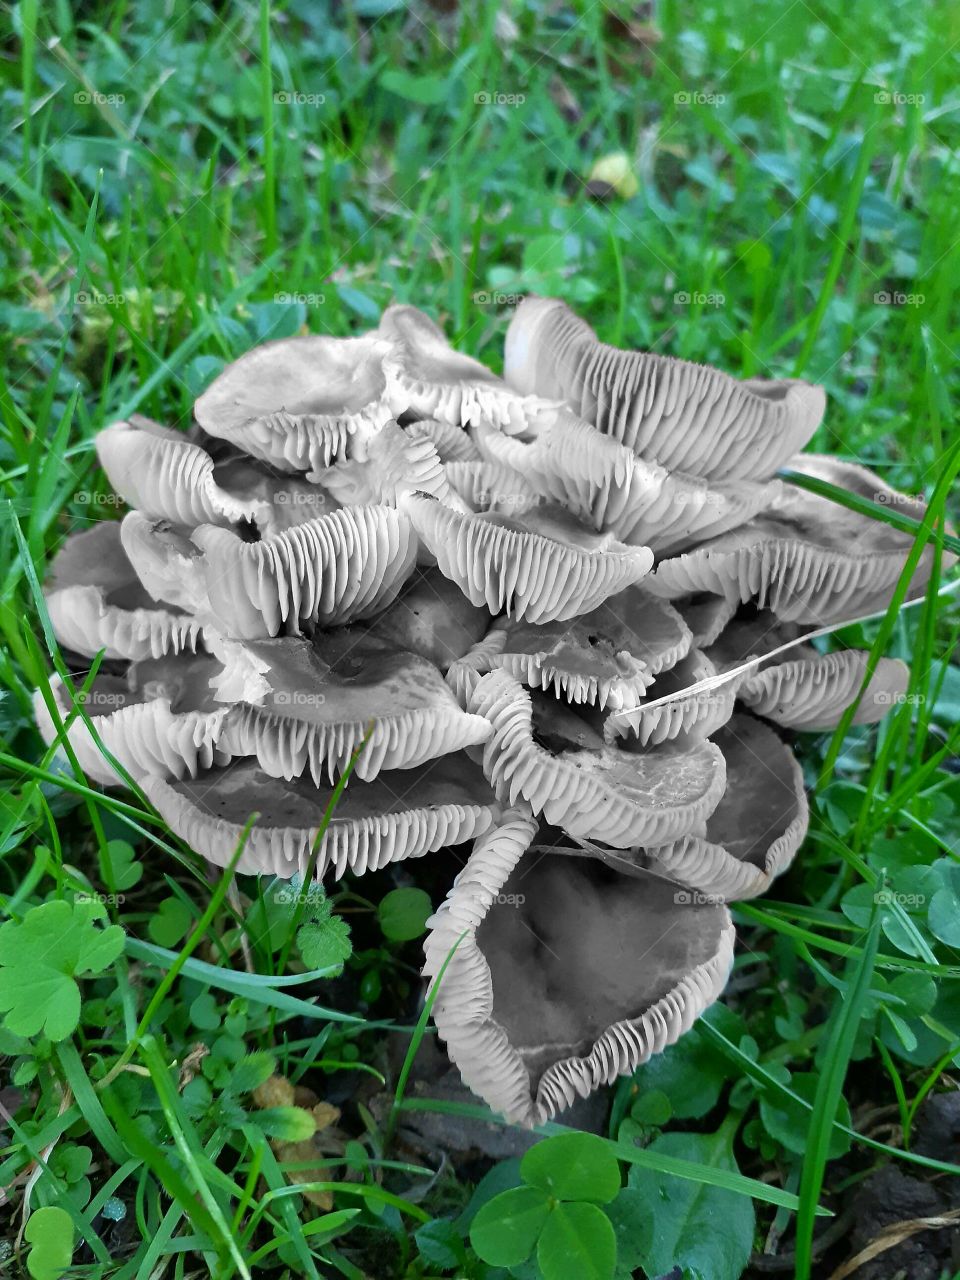 How they look like mushrooms with no color compared to green grass??